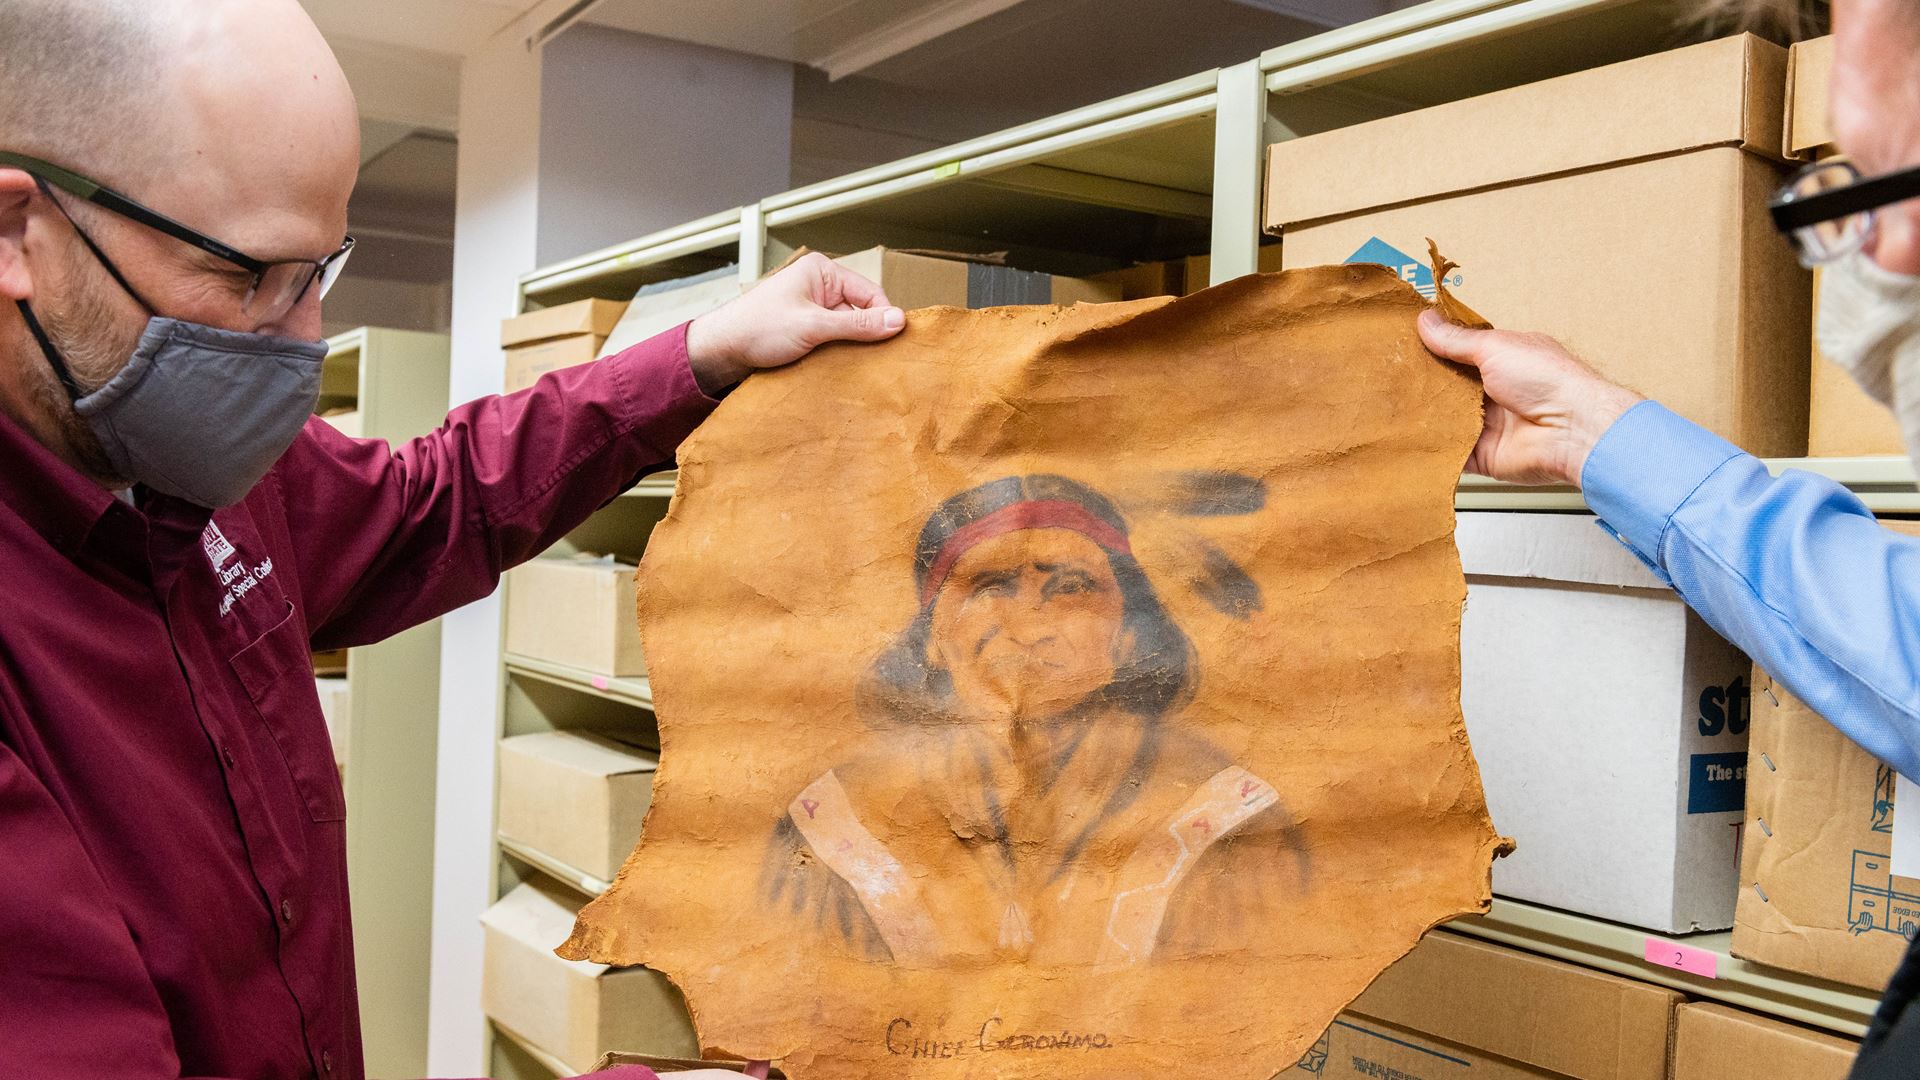 Wendell Chino collection in NMSU Library offers insight into past, blueprint for future